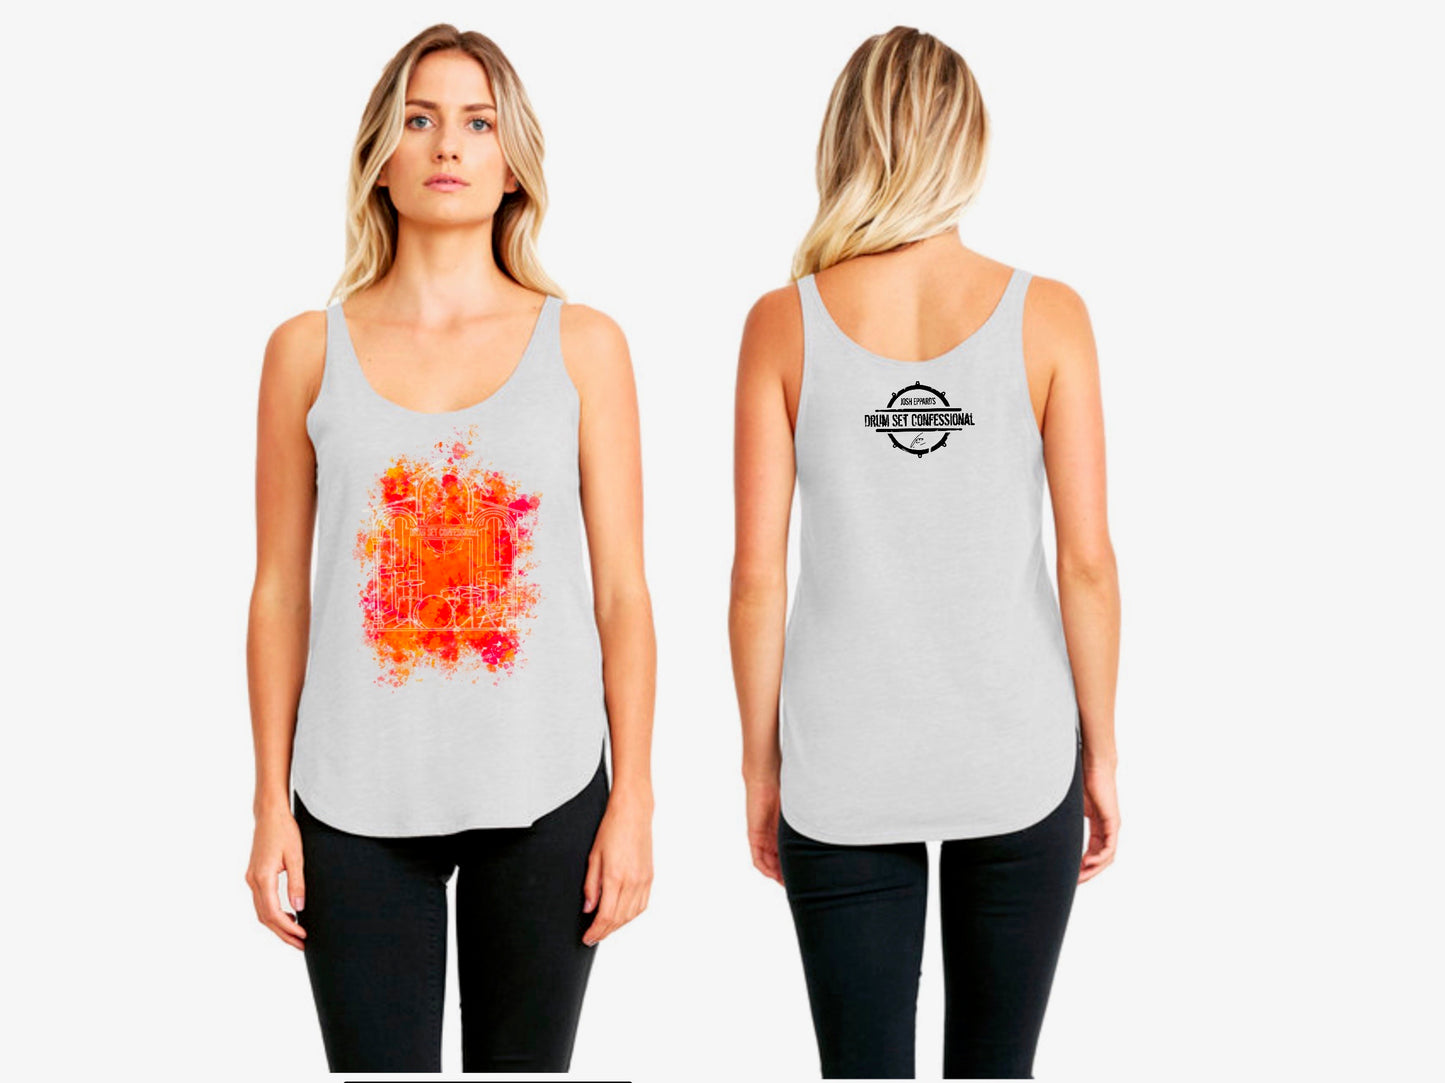 DSC "Confessional" Gray Next Level Apparel Ladies' Festival Tank (100% of profits fuel outreach and donations to addiction/recovery causes.)